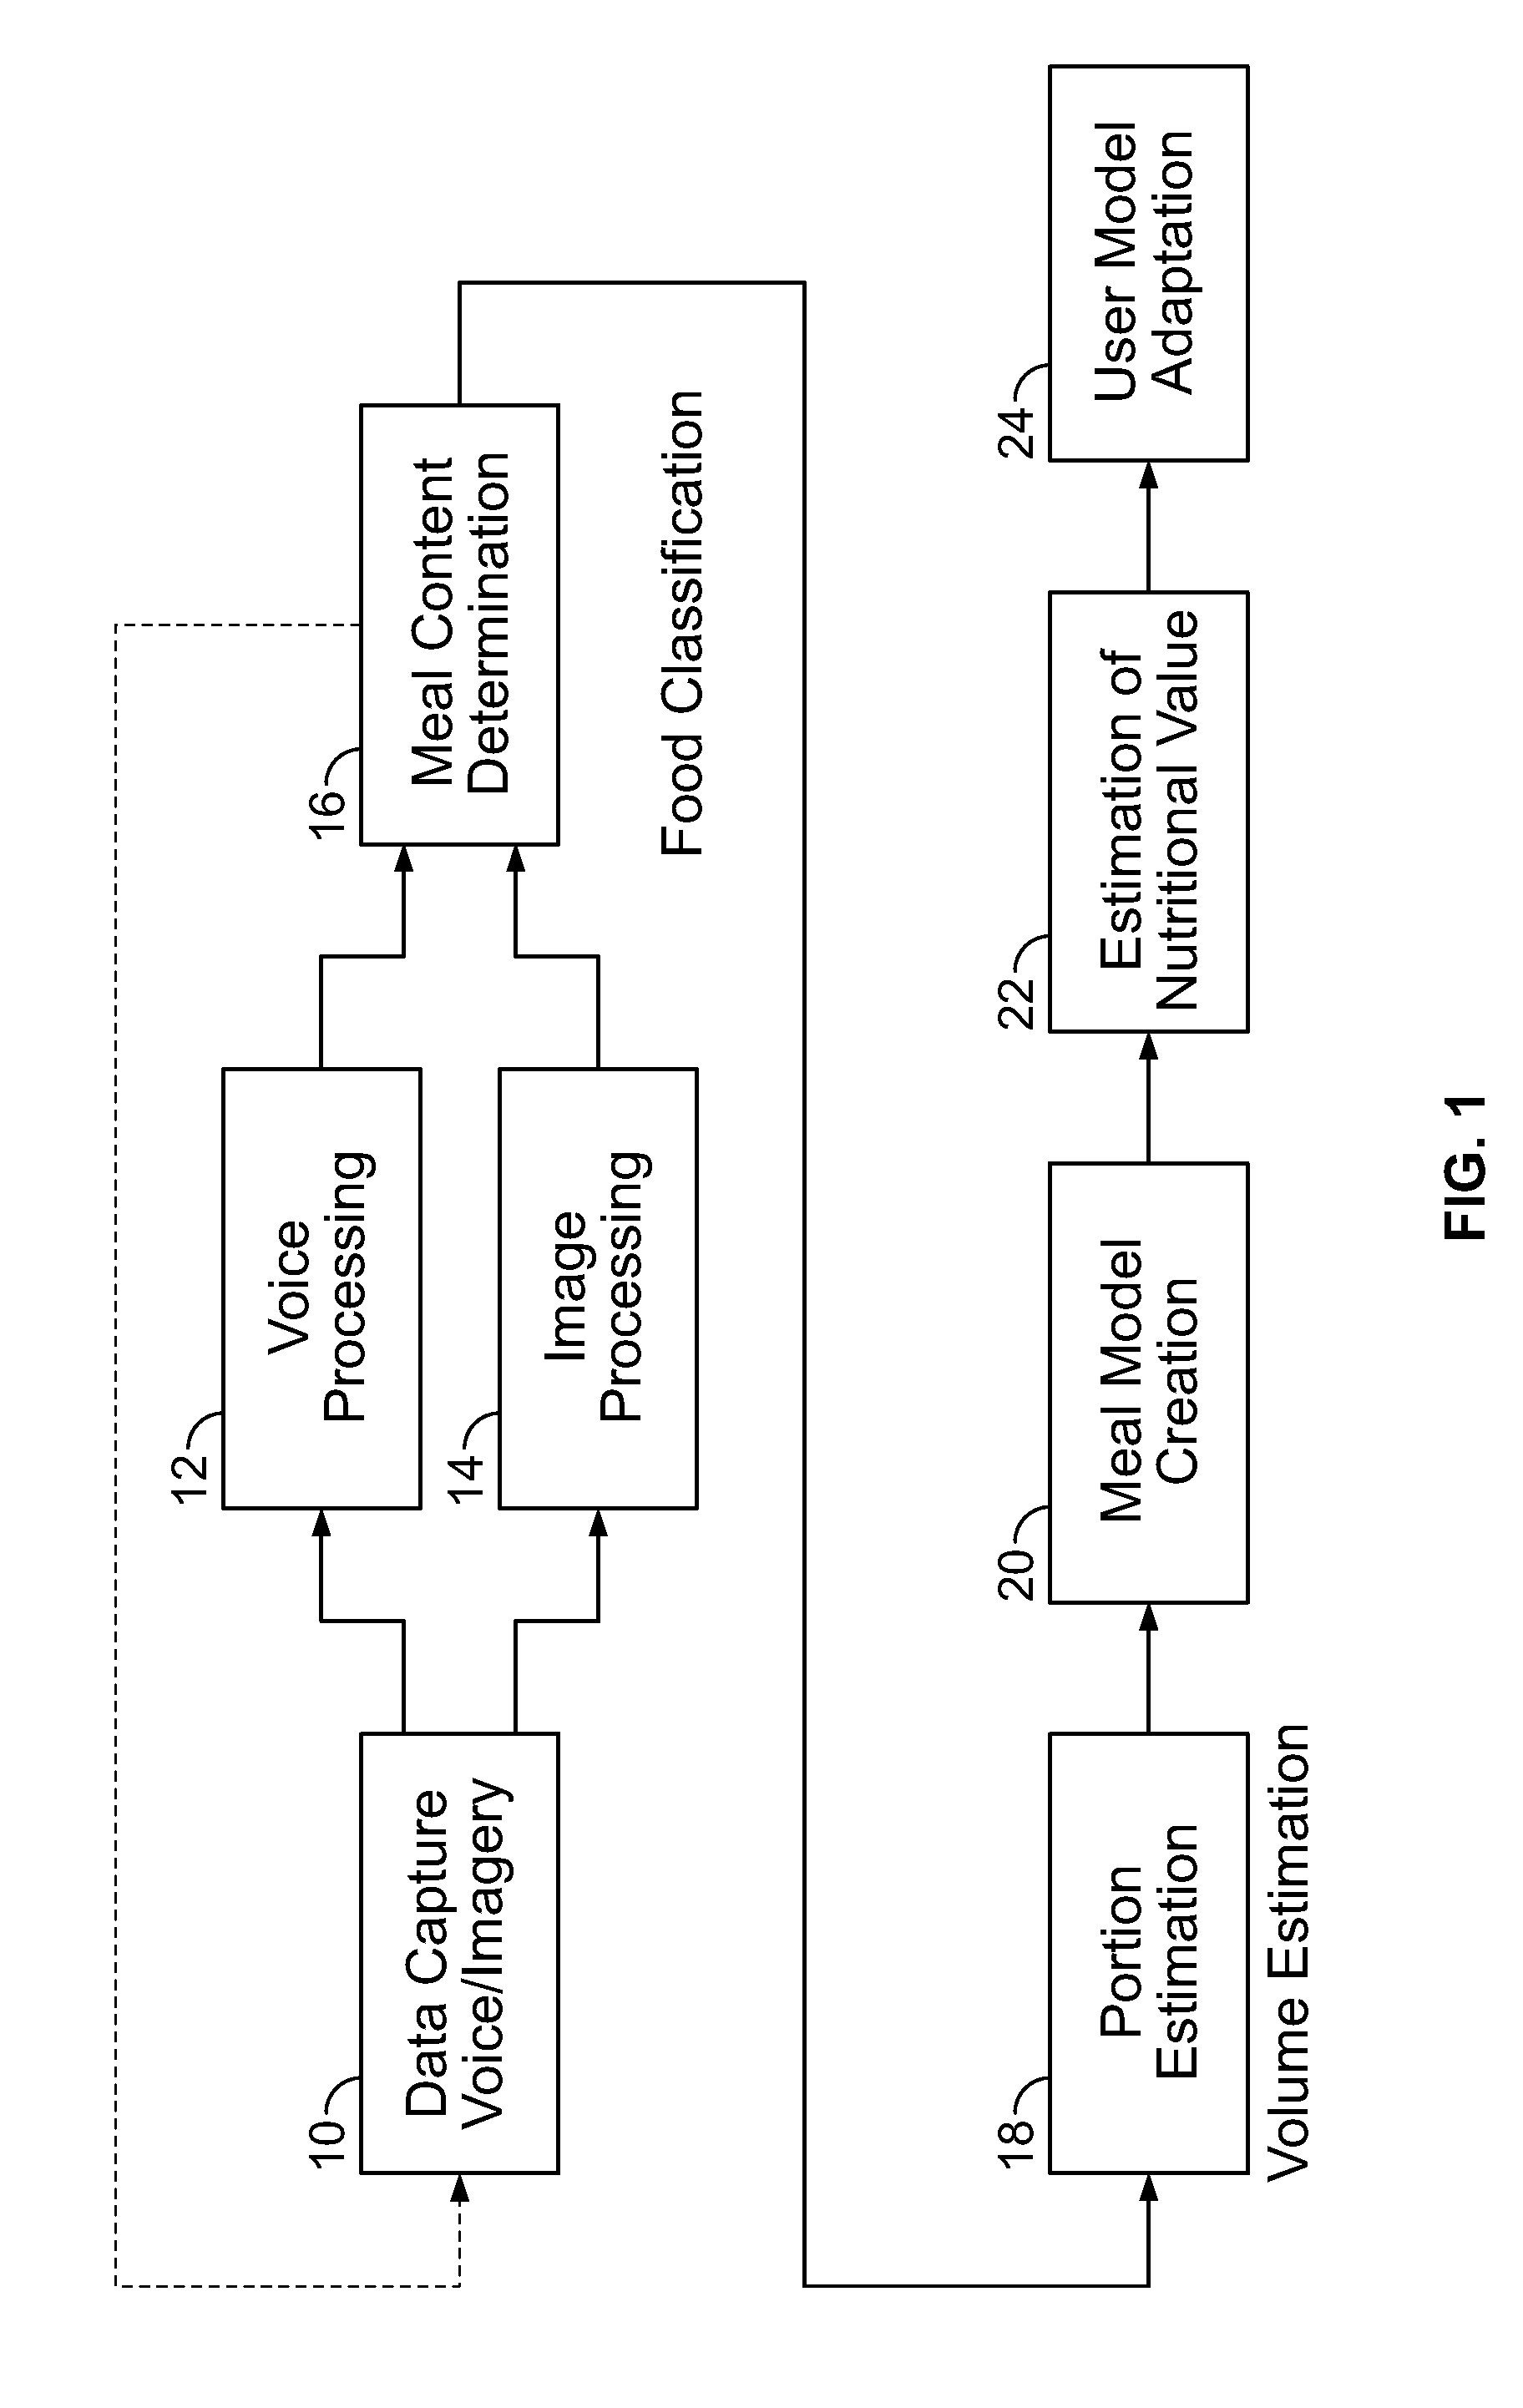 Method for computing food volume in a method for analyzing food